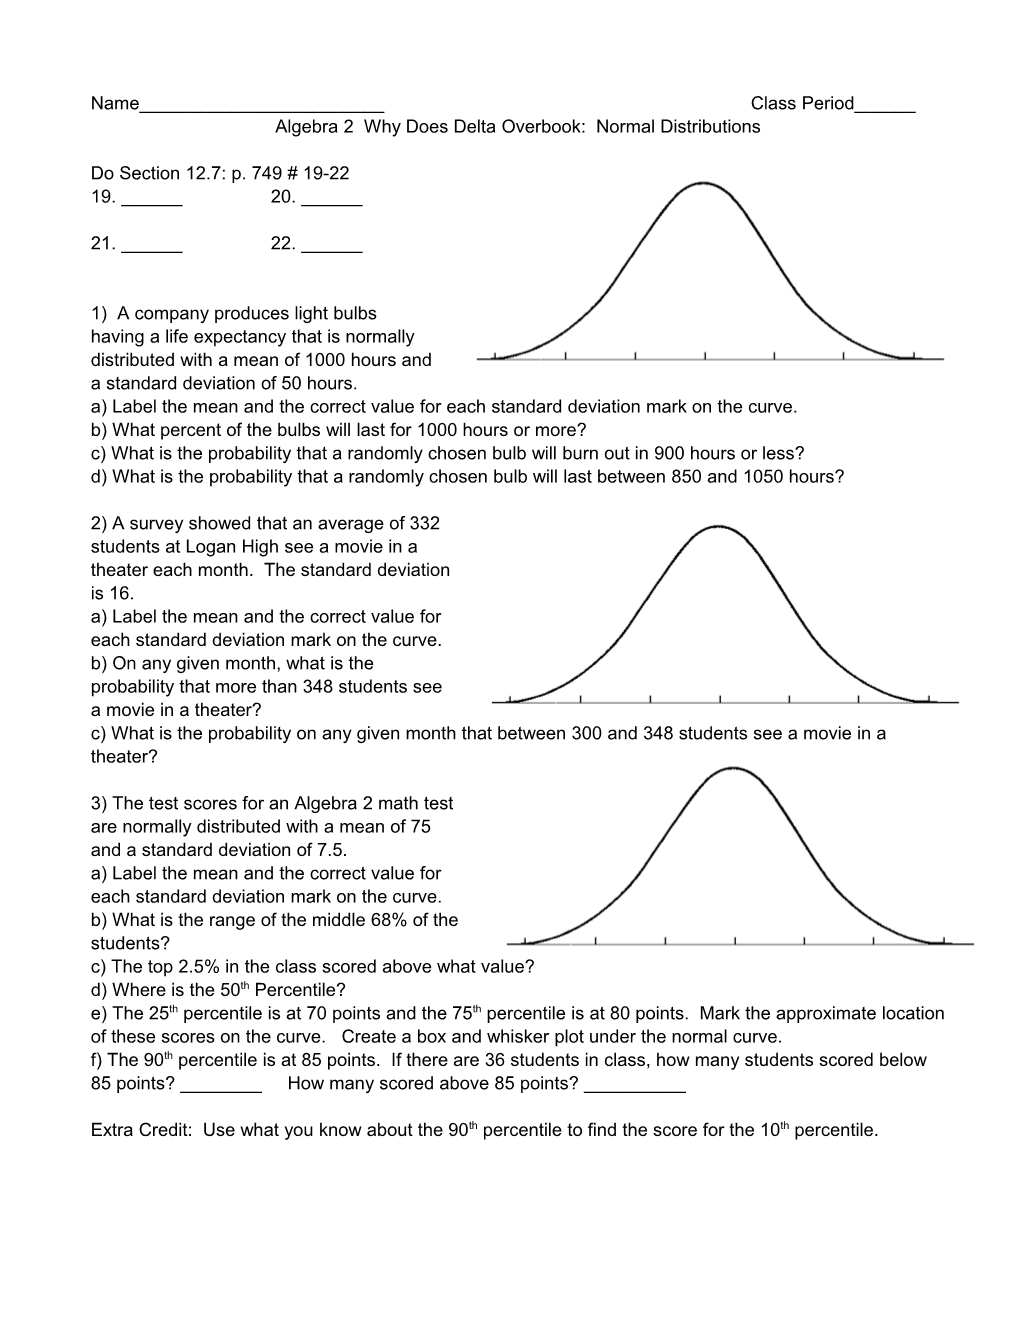 Algebra 2 Why Does Delta Overbook: Normal Distributions